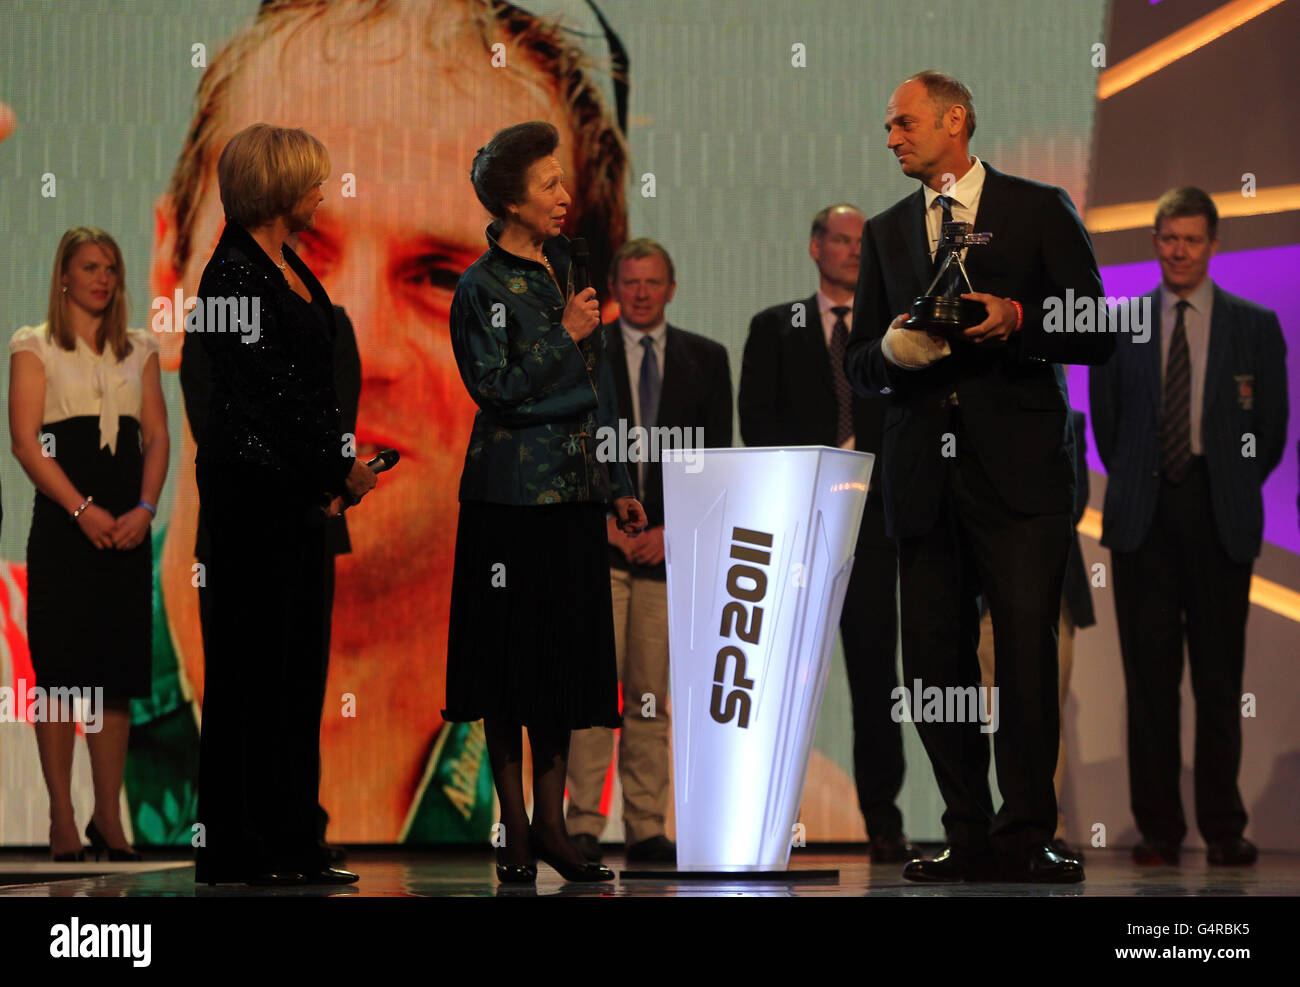 Winner of the Lifetime Achievement Award, Sir Steve Redgrave presented by The Princess Royal during the BBC Sports Personality of the Year awards ceremony at MediacityUK, Salford. Stock Photo